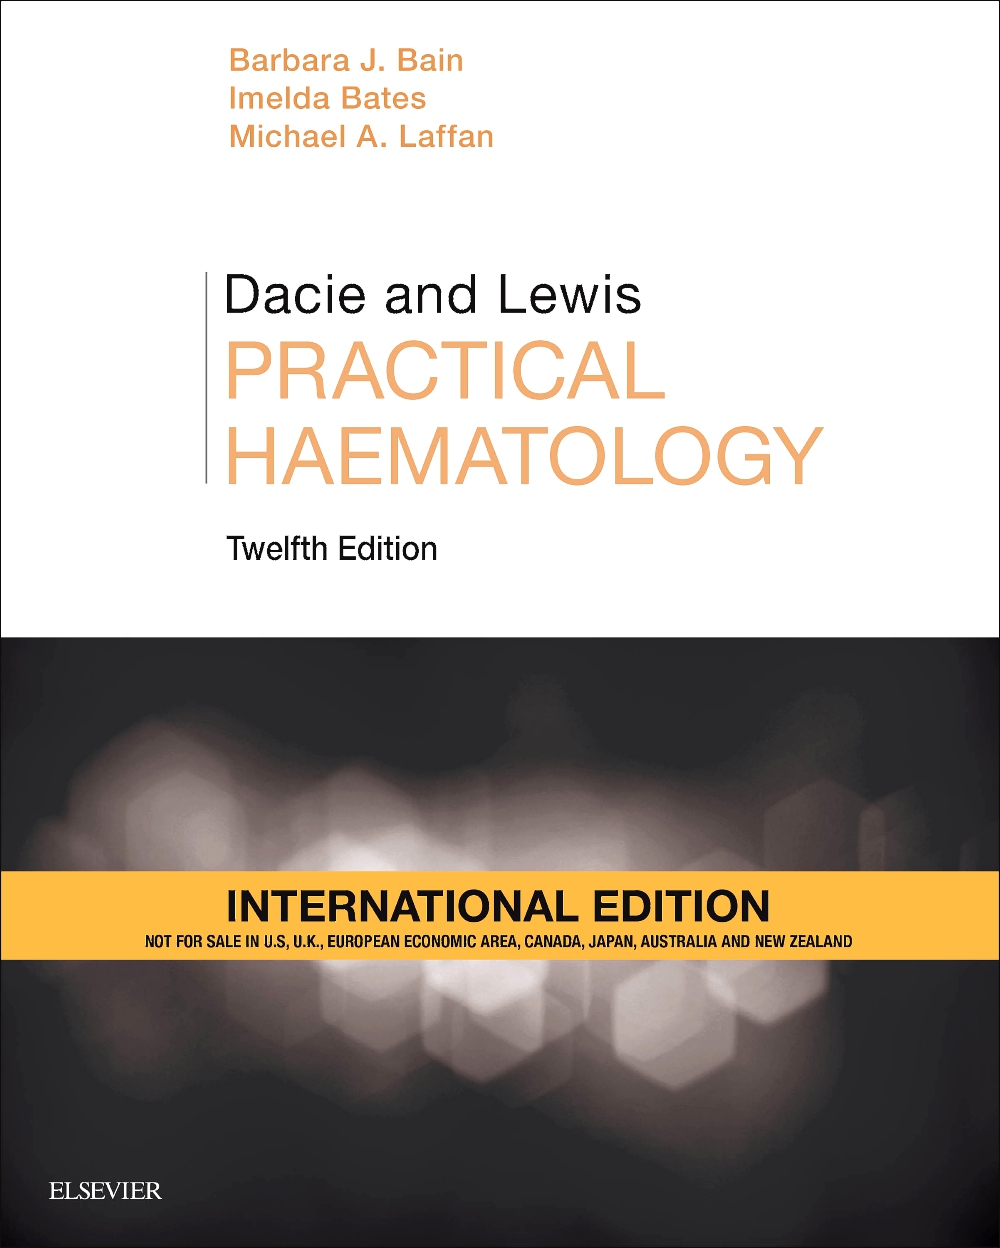 Dacie And Lewis Practical Hematology International Edition, 12E